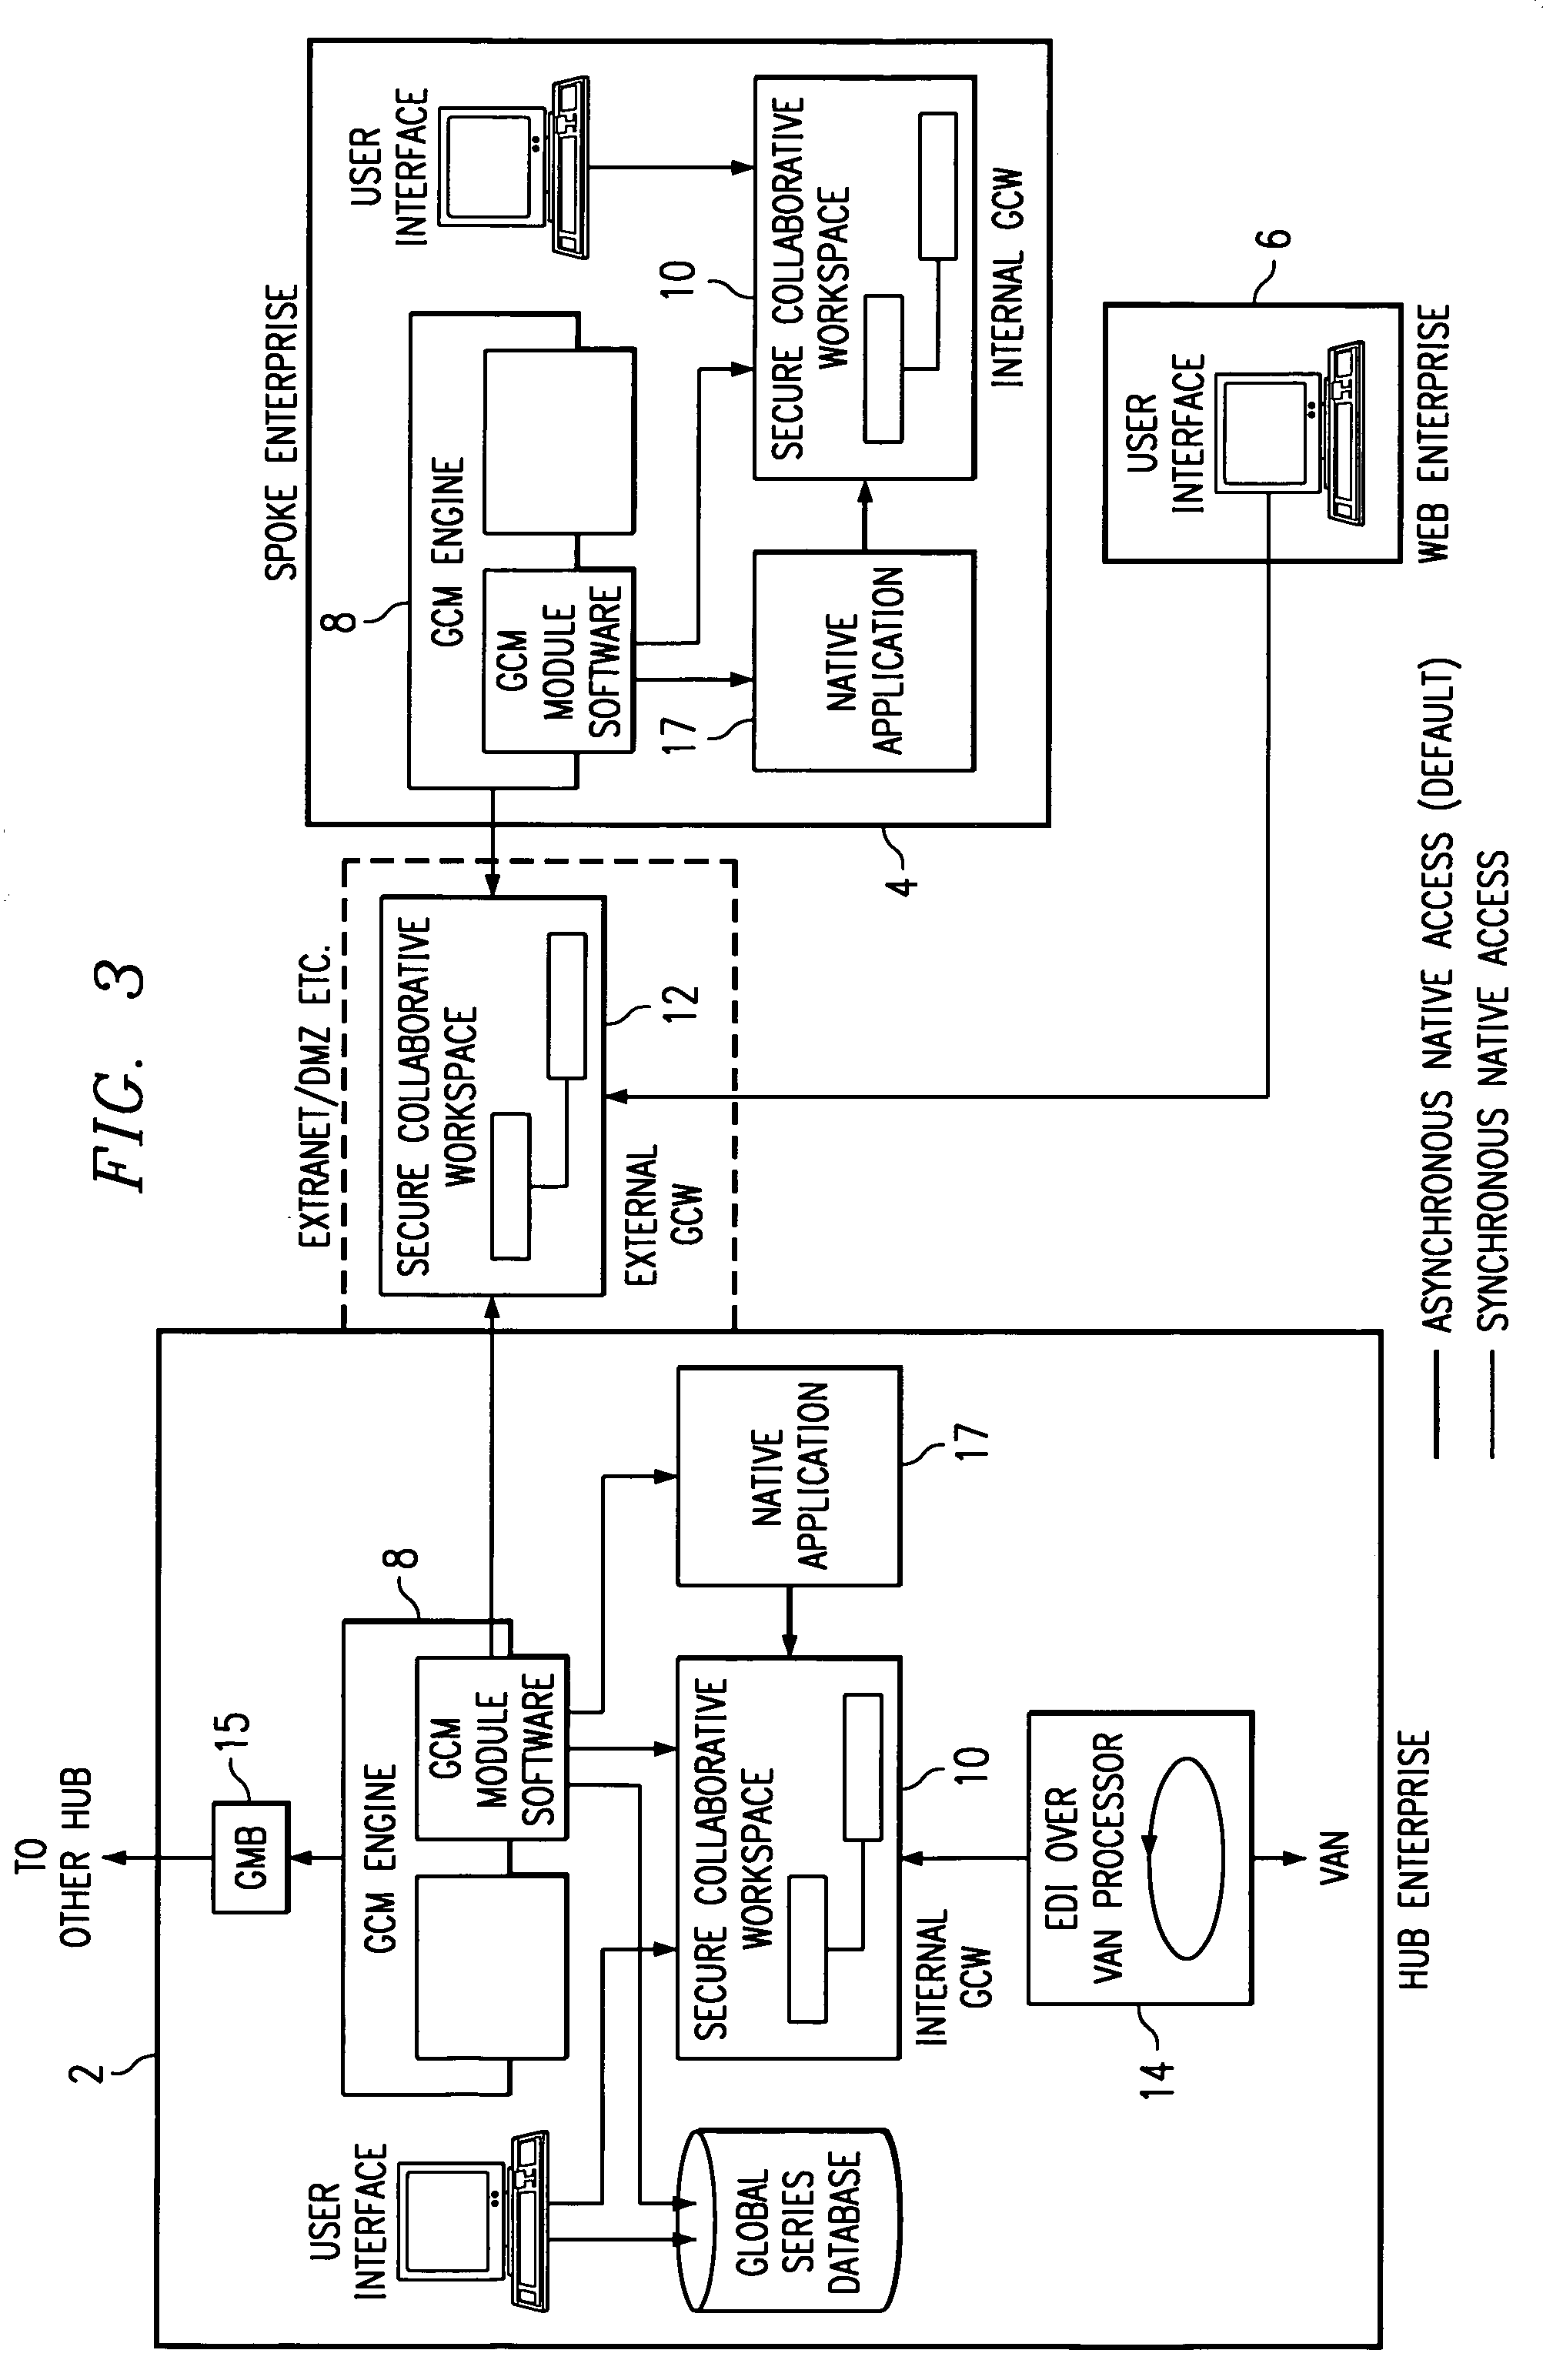 Method and system for managing collaboration within and between enterprises